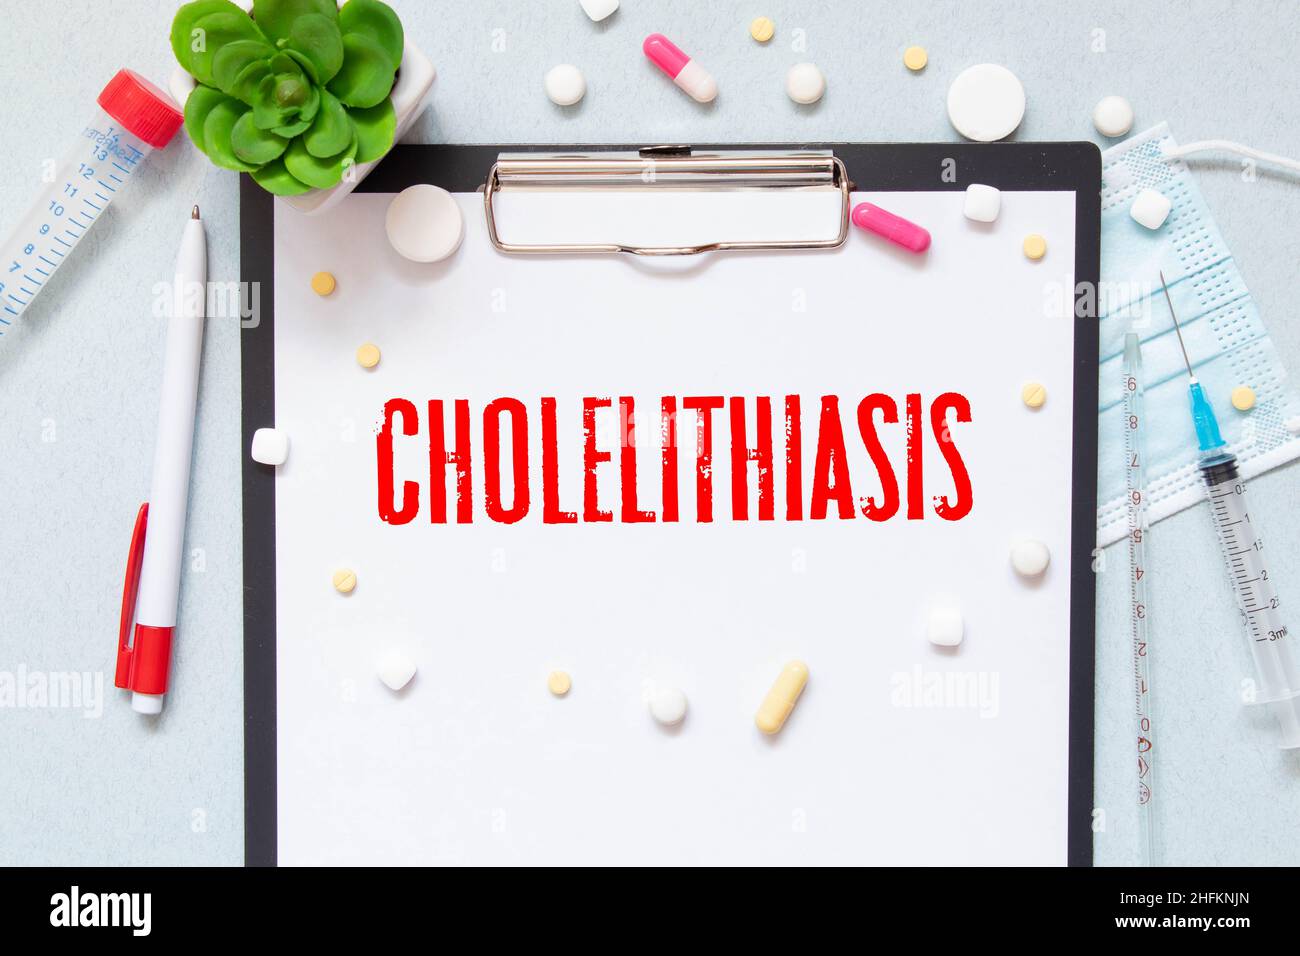 Cholecystitis word, medical term word with medical concepts in blackboard and medical equipment. Stock Photo